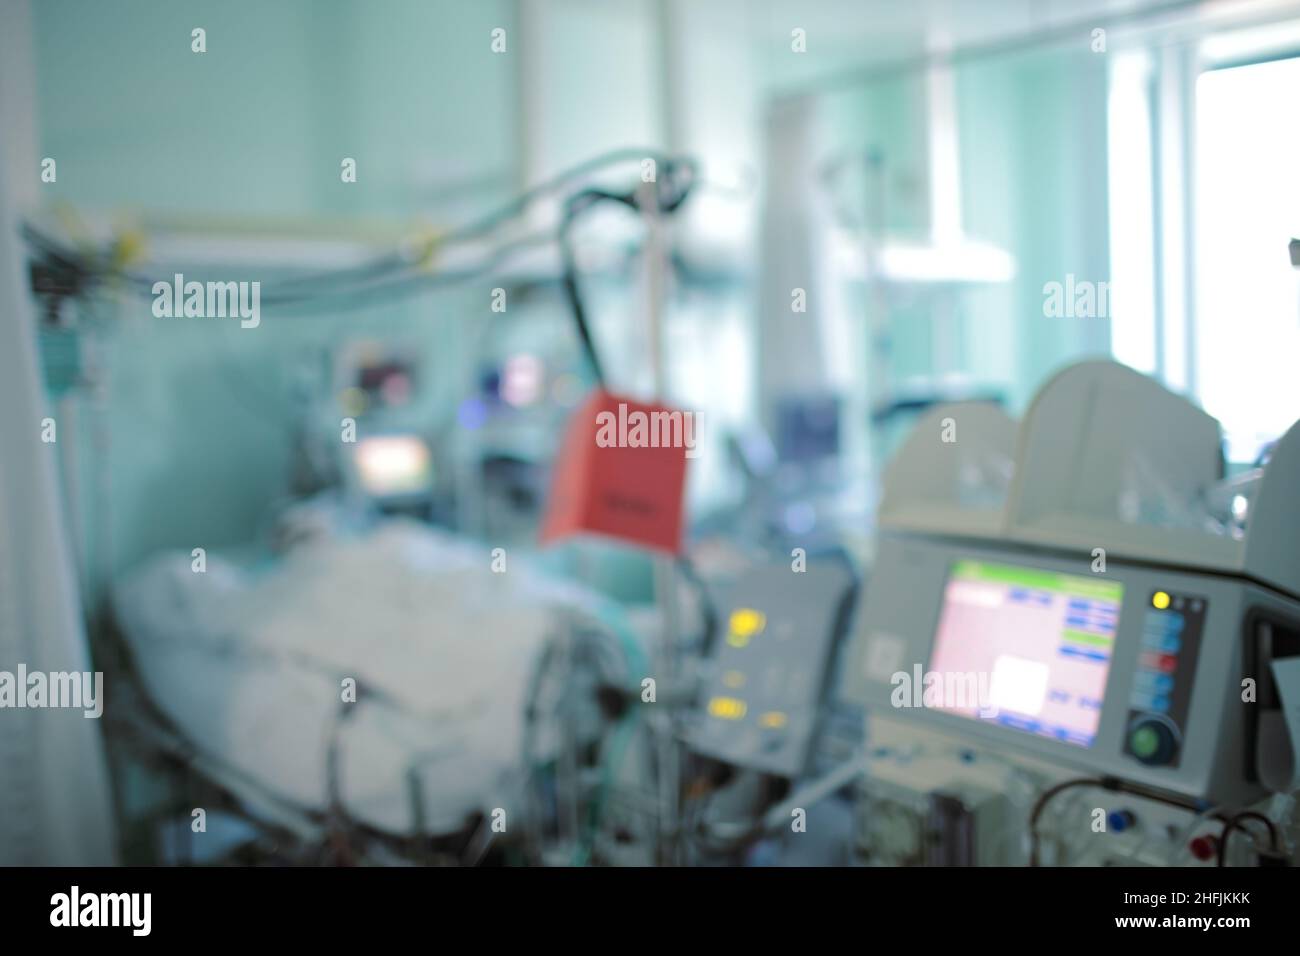 Human silhouette lying in the hospital bed and covered with white planket in the digital life support monitoring, unfocused background. Stock Photo